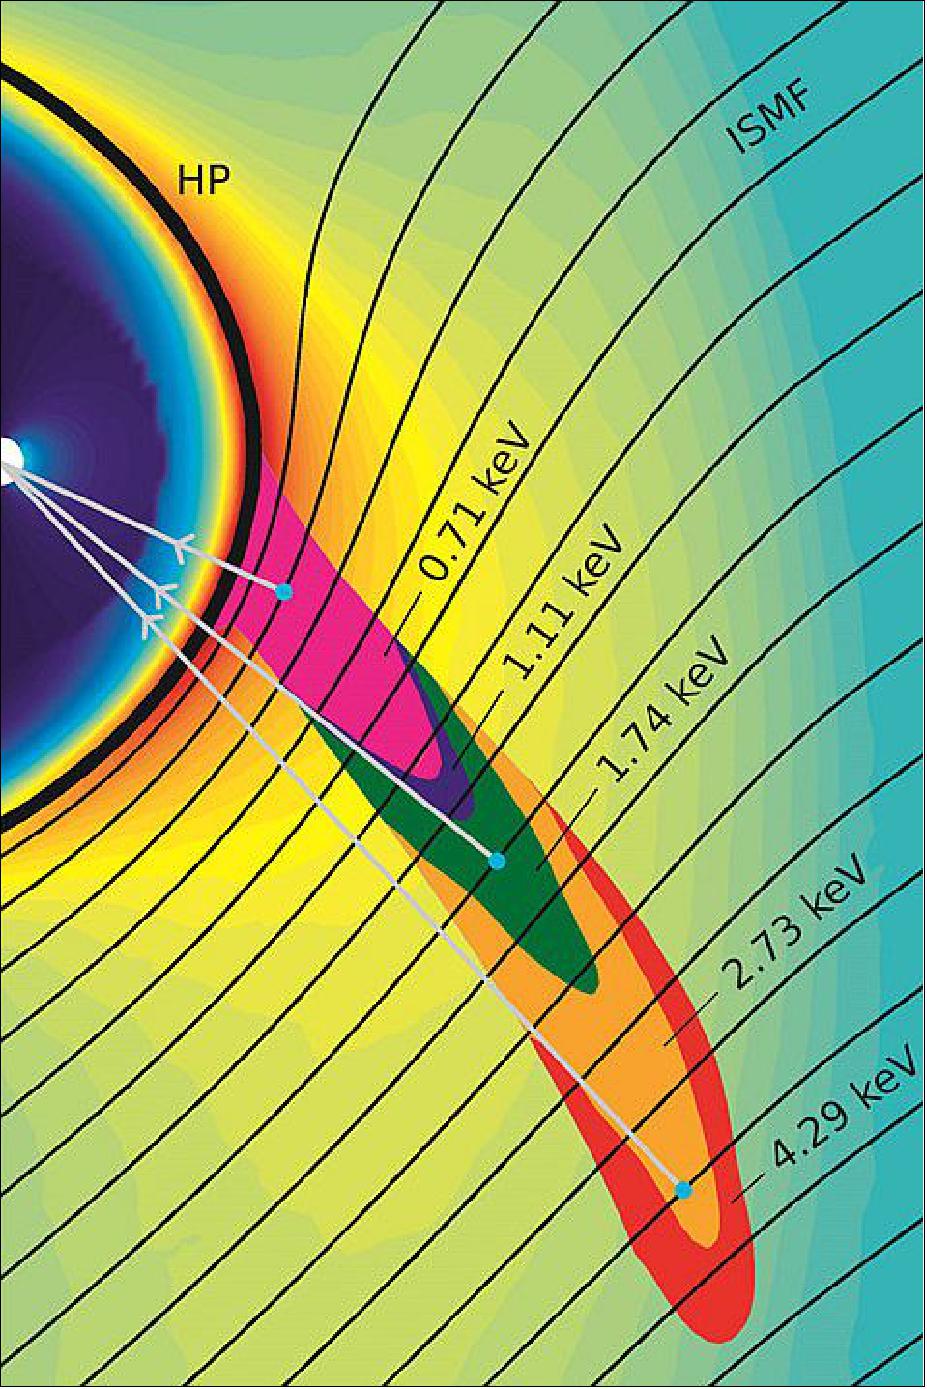 Figure 25: Illustration of the origin of ribbon particles of different energies or speeds outside the heliopause (labeled HP). The IBEX ribbon particles interact with the interstellar magnetic field (labeled ISMF) and travel inwards toward Earth, collectively giving the impression of a ribbon spanning across the sky (image credit: SwRI, Zirnstein)